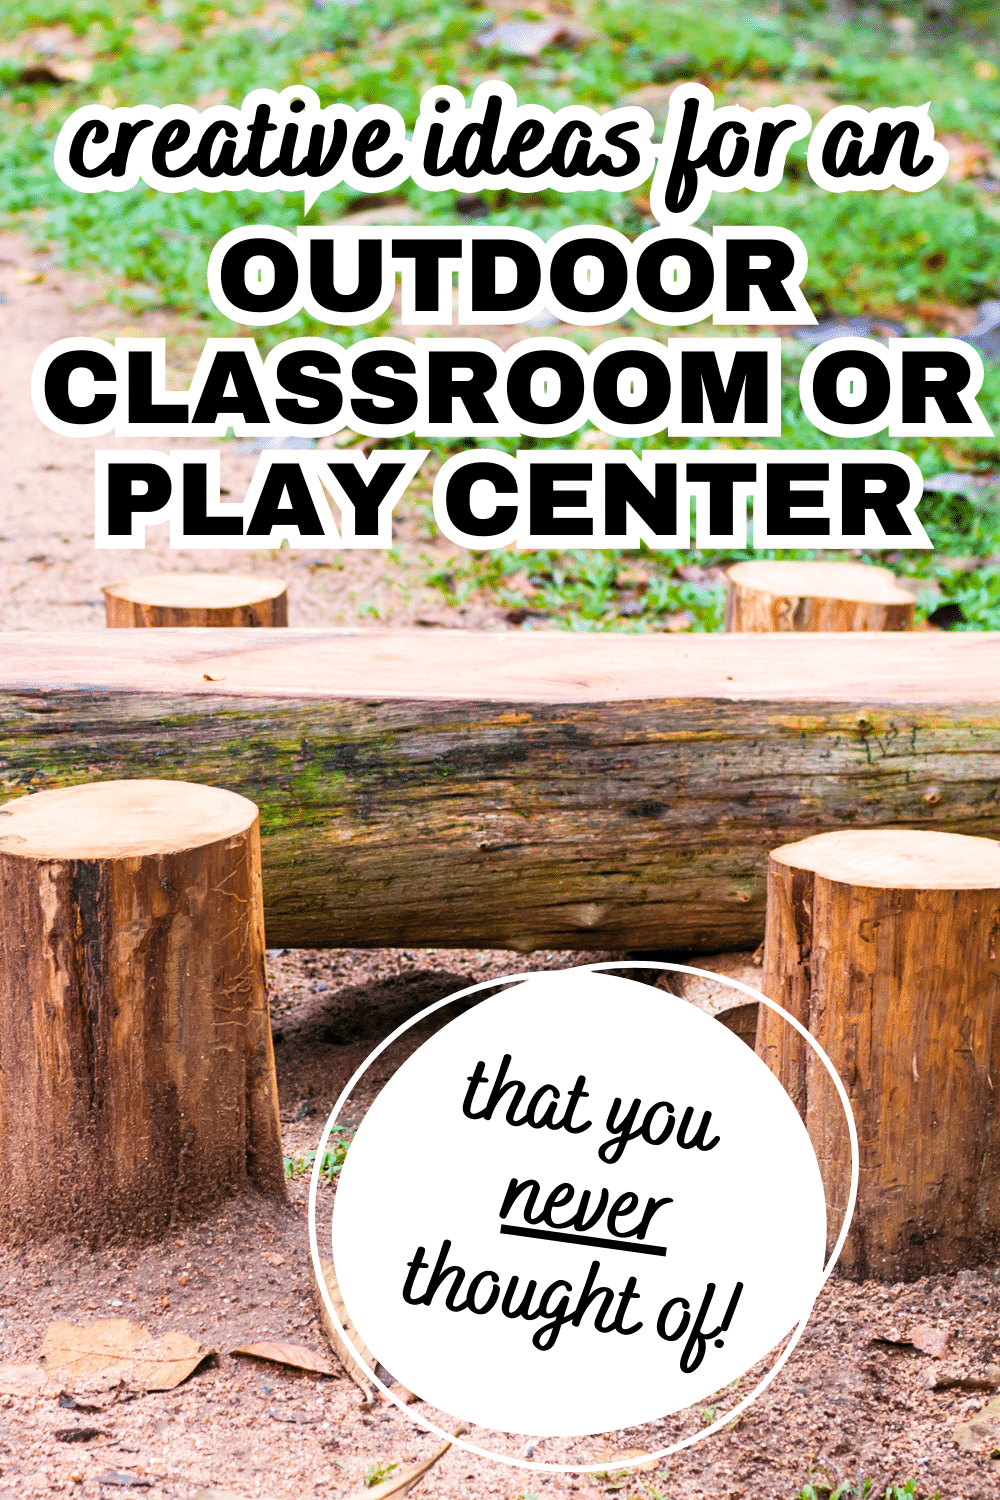 Outdoor Classroom Furniture made out of logs and trees